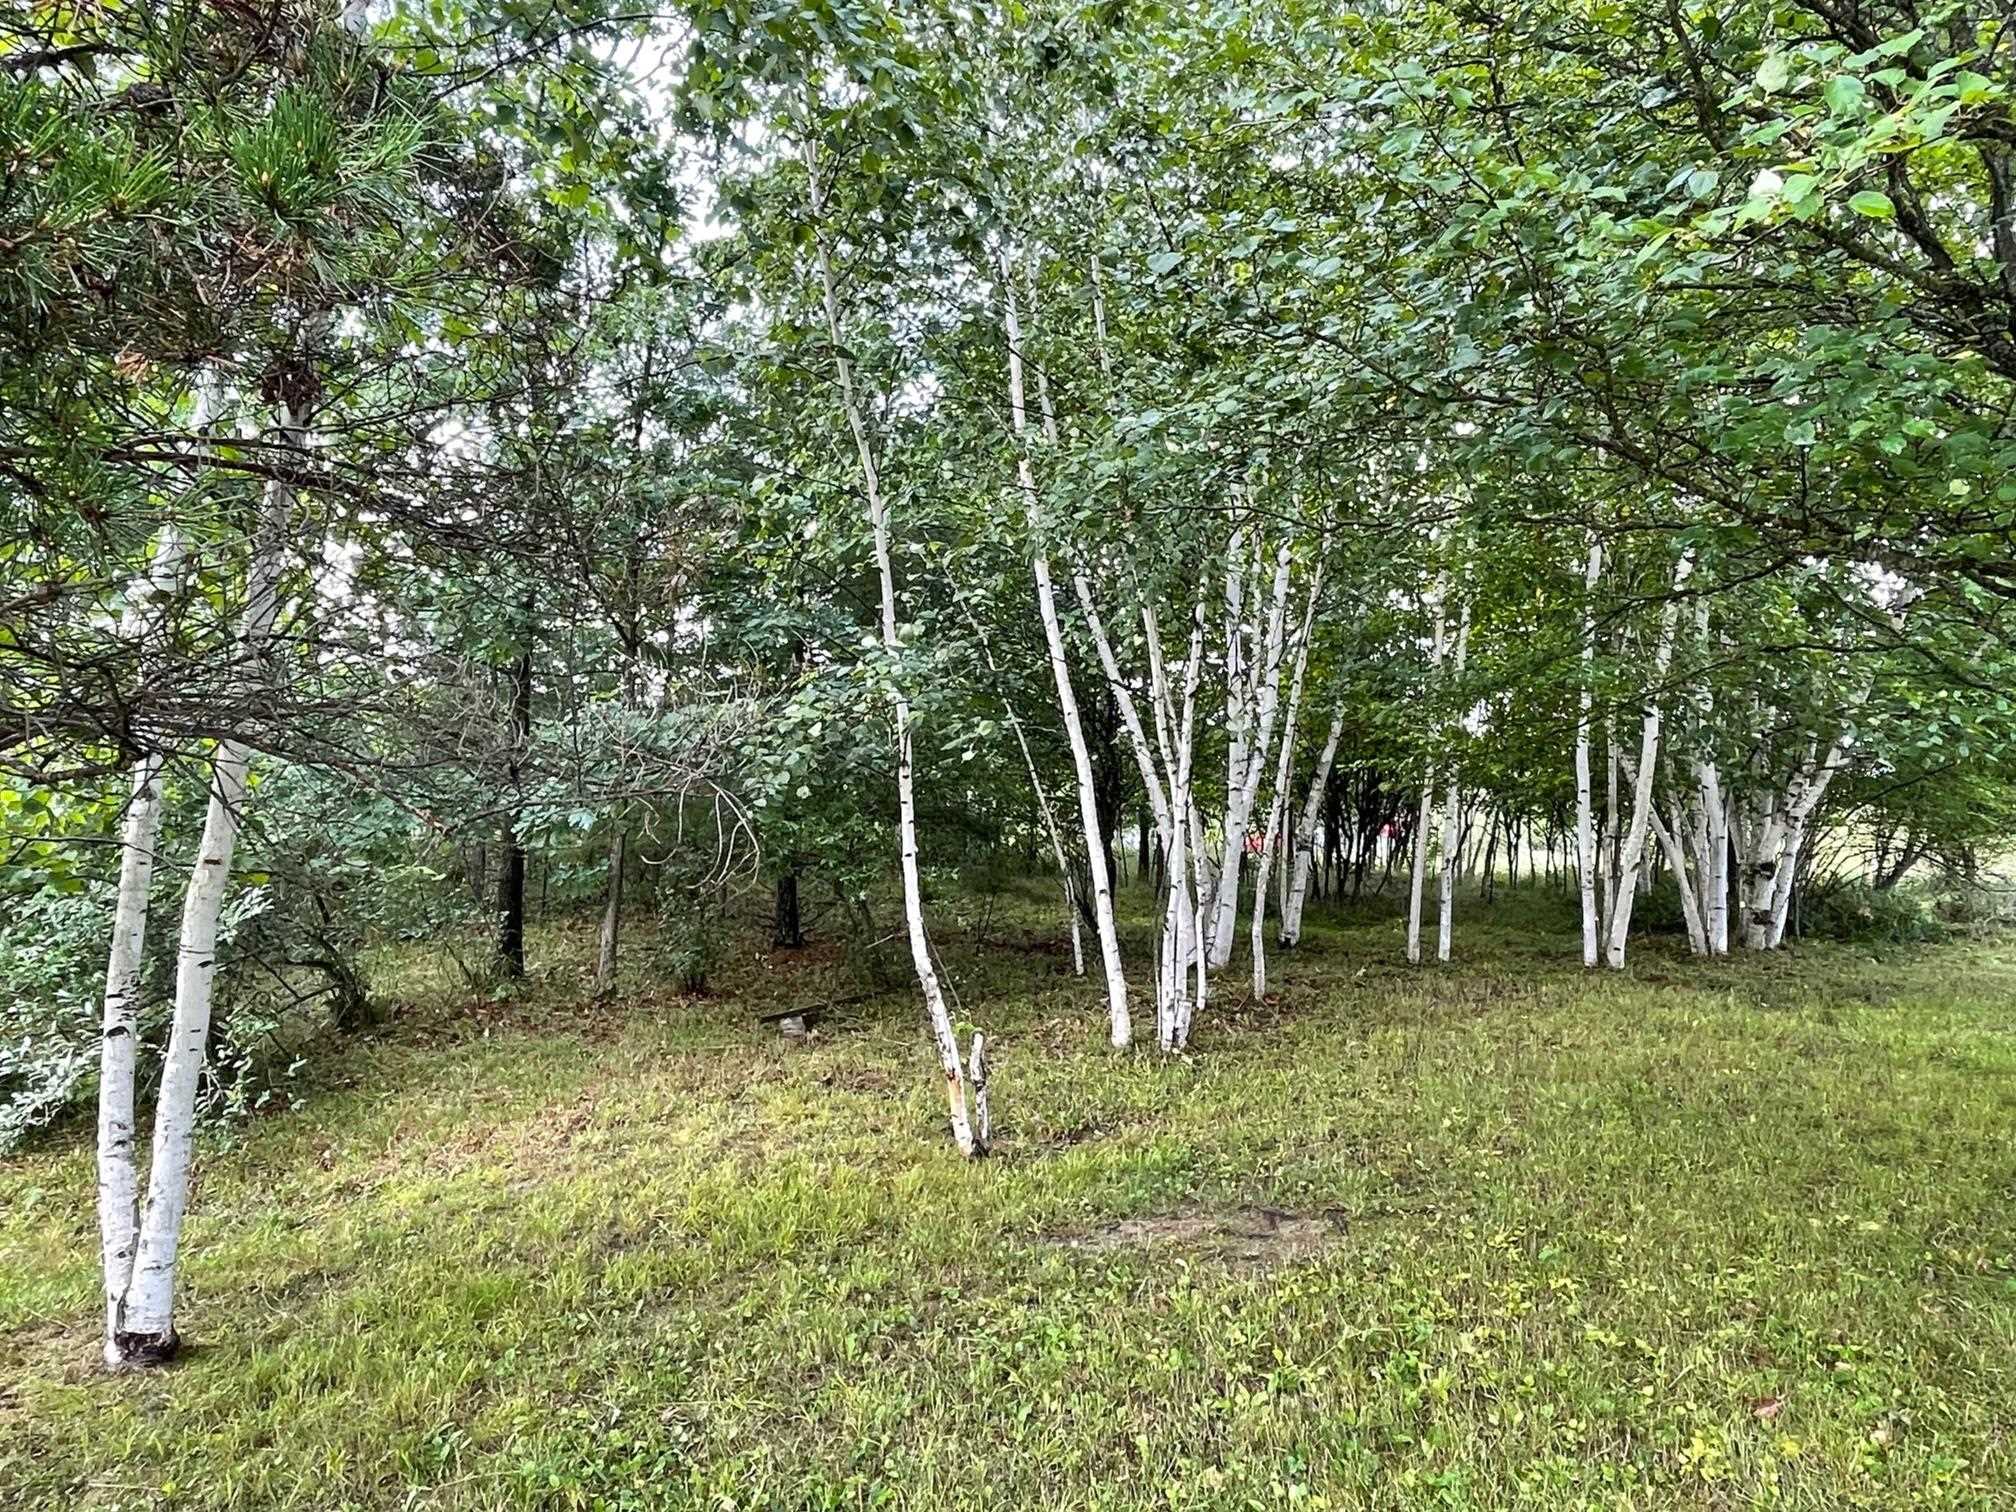 Nestle your camper among these beautiful Birch Trees.  Beautiful location for camping or building.   1/3 acre surrounded with log homes and wide open spaces.  Lot has electric and drive only.  Adjacent to a commons area on right.  Perfect location for building and not being on top of your neighbors.  You will be required to apply for permit and hook up to sewer system by January 2023 to camp.  Ownership provides access to an 18 hole golf course , restaurant/pub, fitness center, indoor heated pool, tennis/bocce ball courts, chalet/sledding hill, walking (nature) trails, activity bldg, storage area, 2 all sports lakes, Lk Lancer/Lancelot, 15 beach clubs (5 with beach/bath house). Or fly to/from Sugar Springs off a 3500ft well maintained grass airpark.   www.airnav.com   5M6.    ALL just 2-1/2 hours from Detroit!